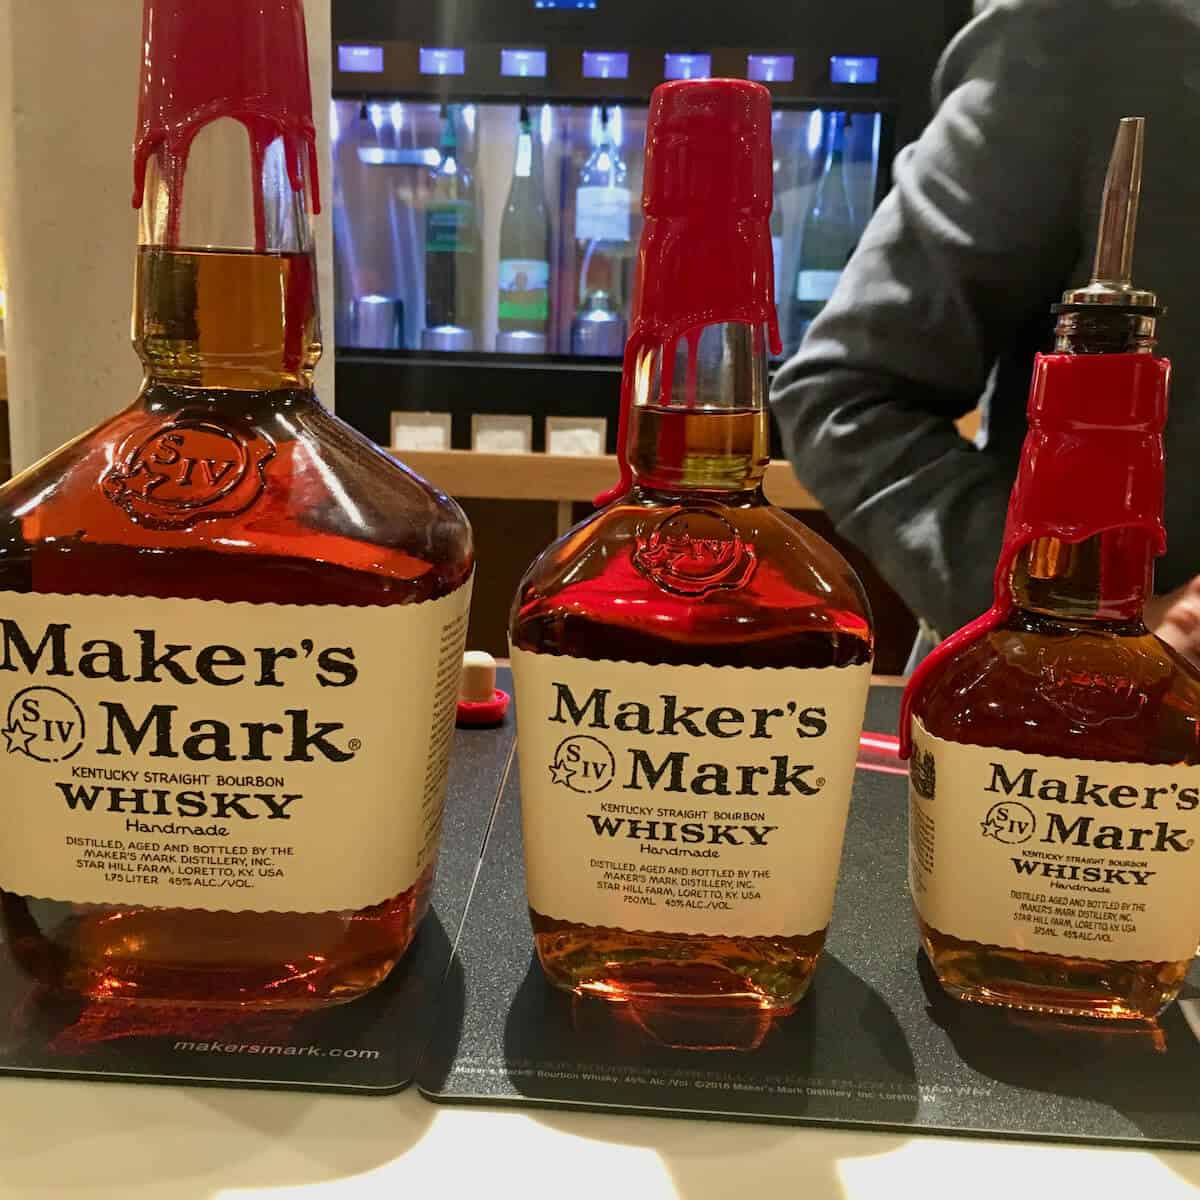 Three sizes of Maker's Mark bottles on a counter.